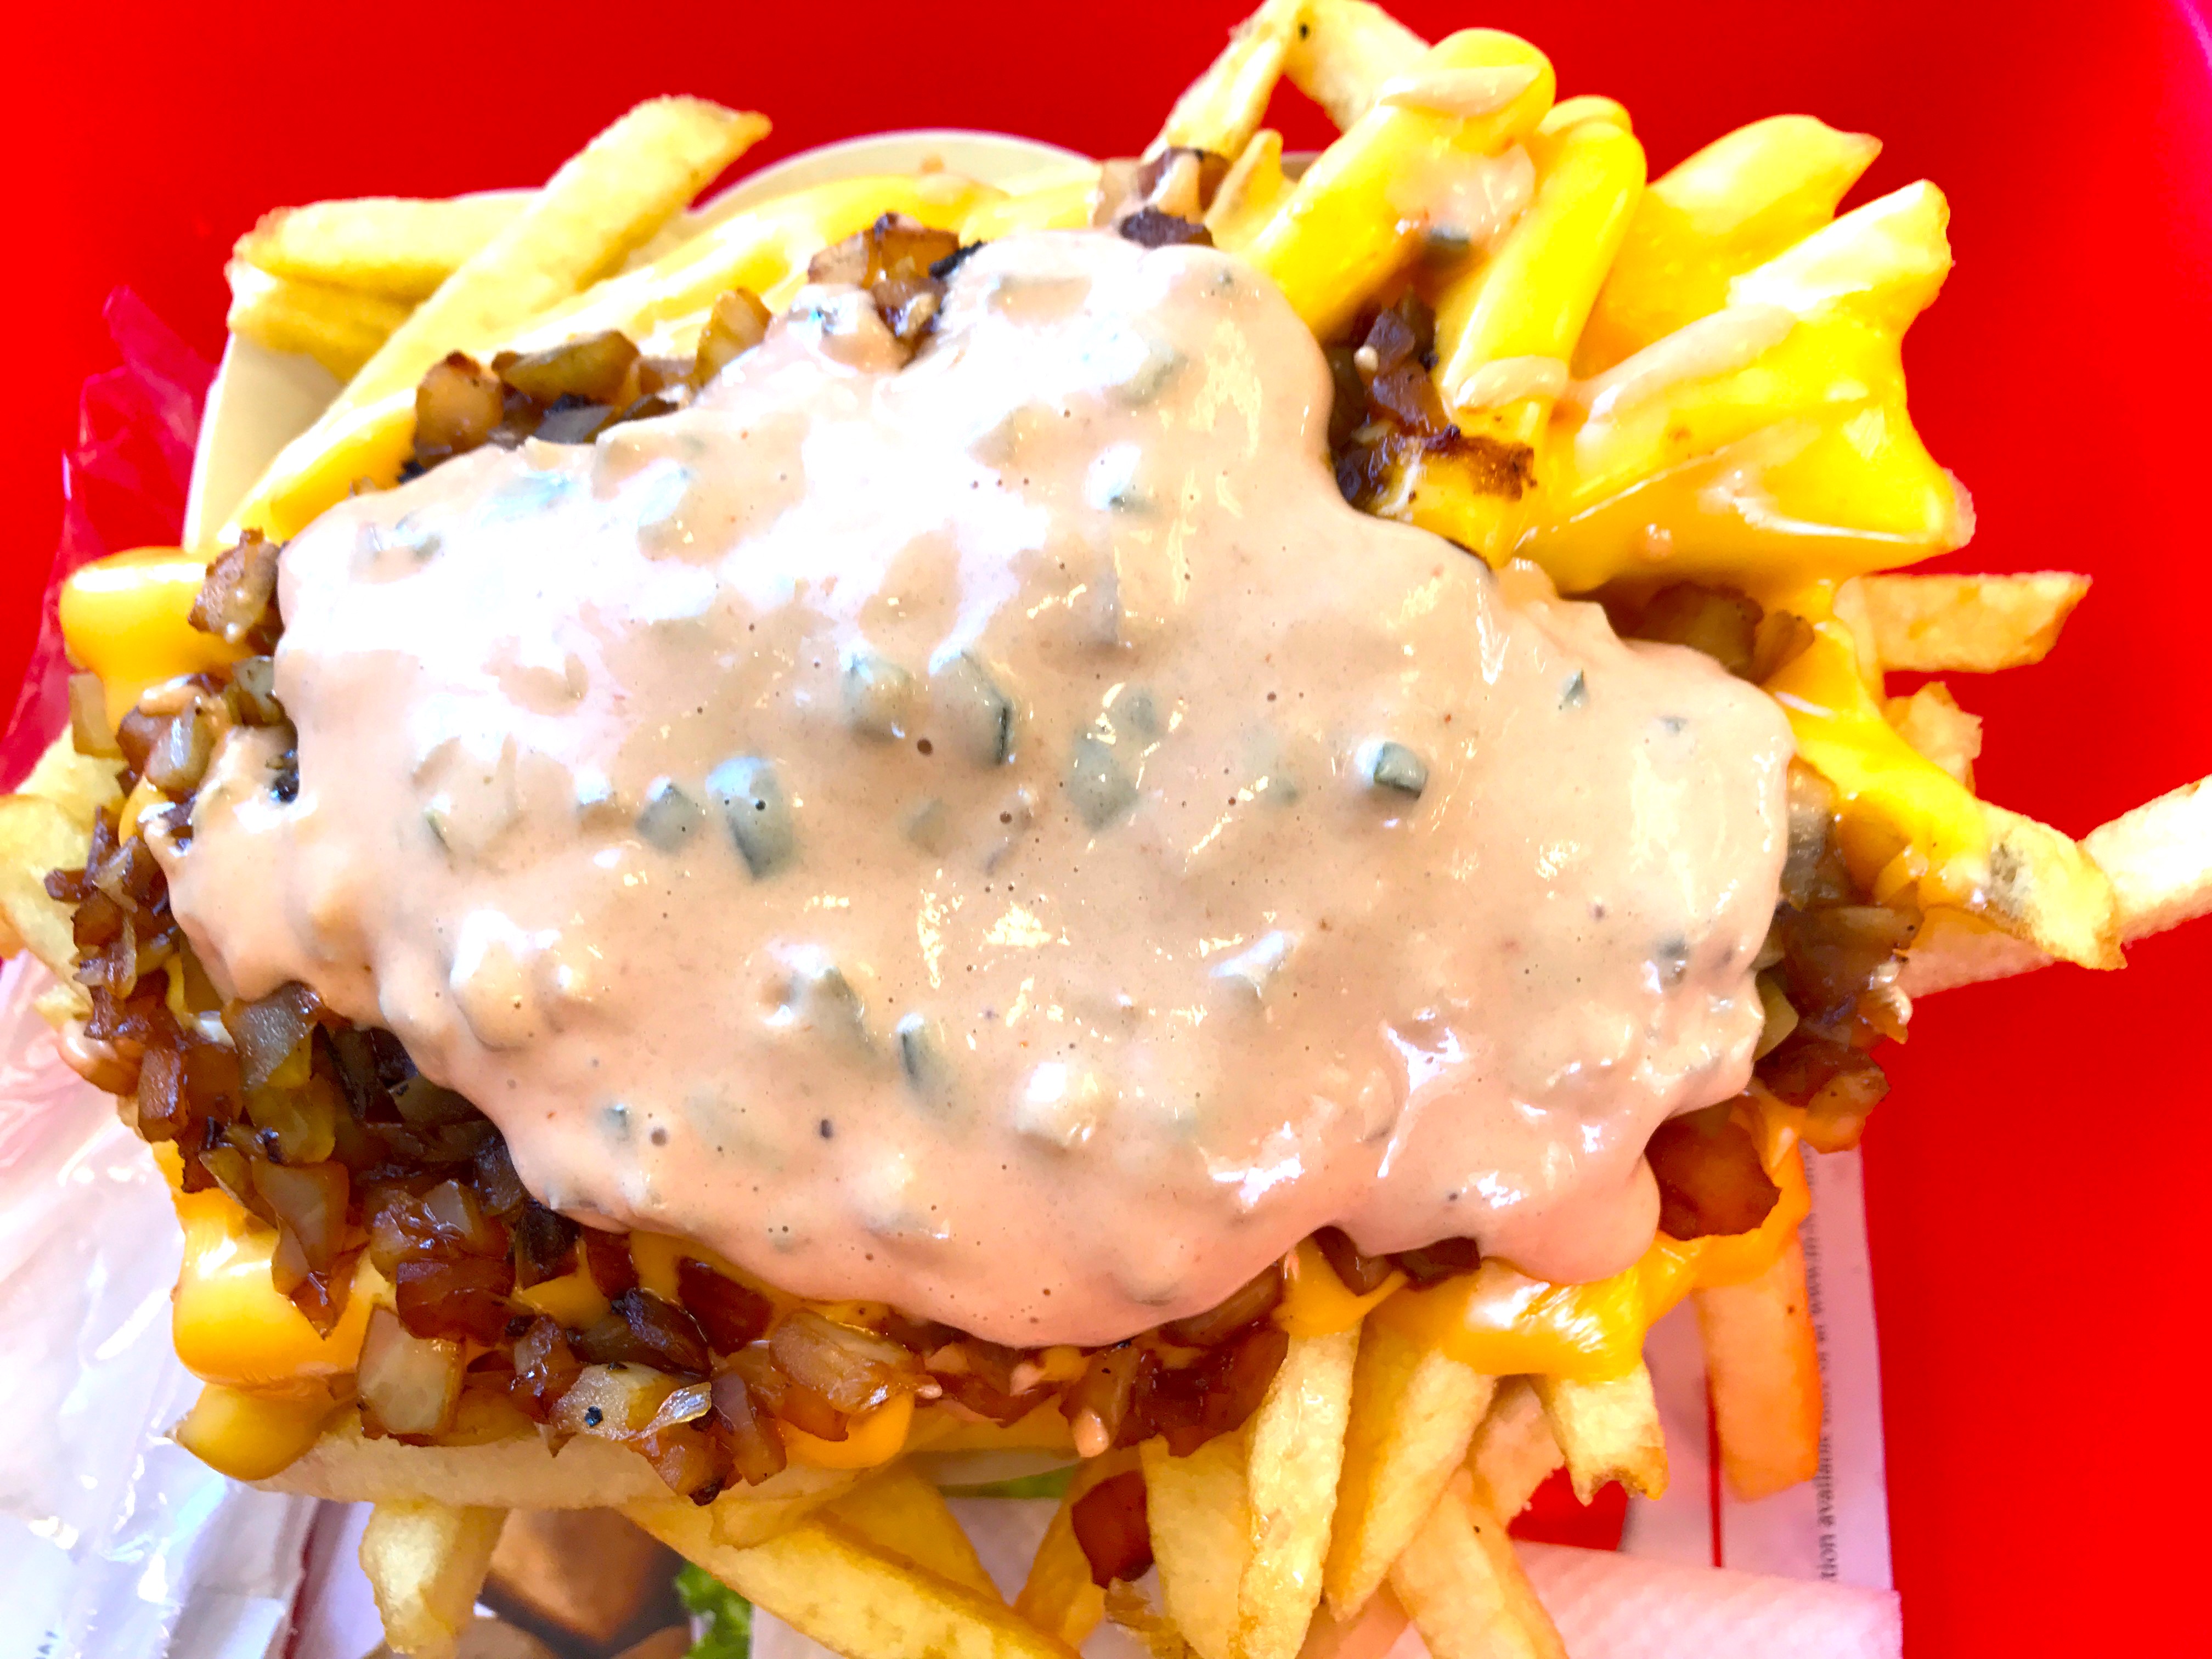 in-n-out animal style french fries – johnrieber